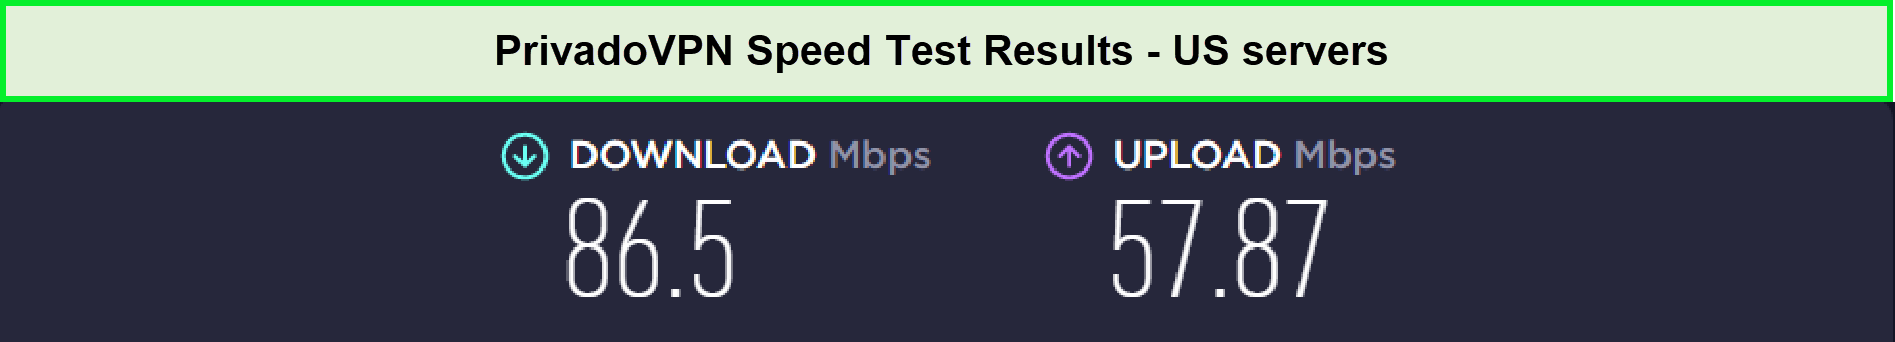 privadovpn-speed-tests-in-Singapore